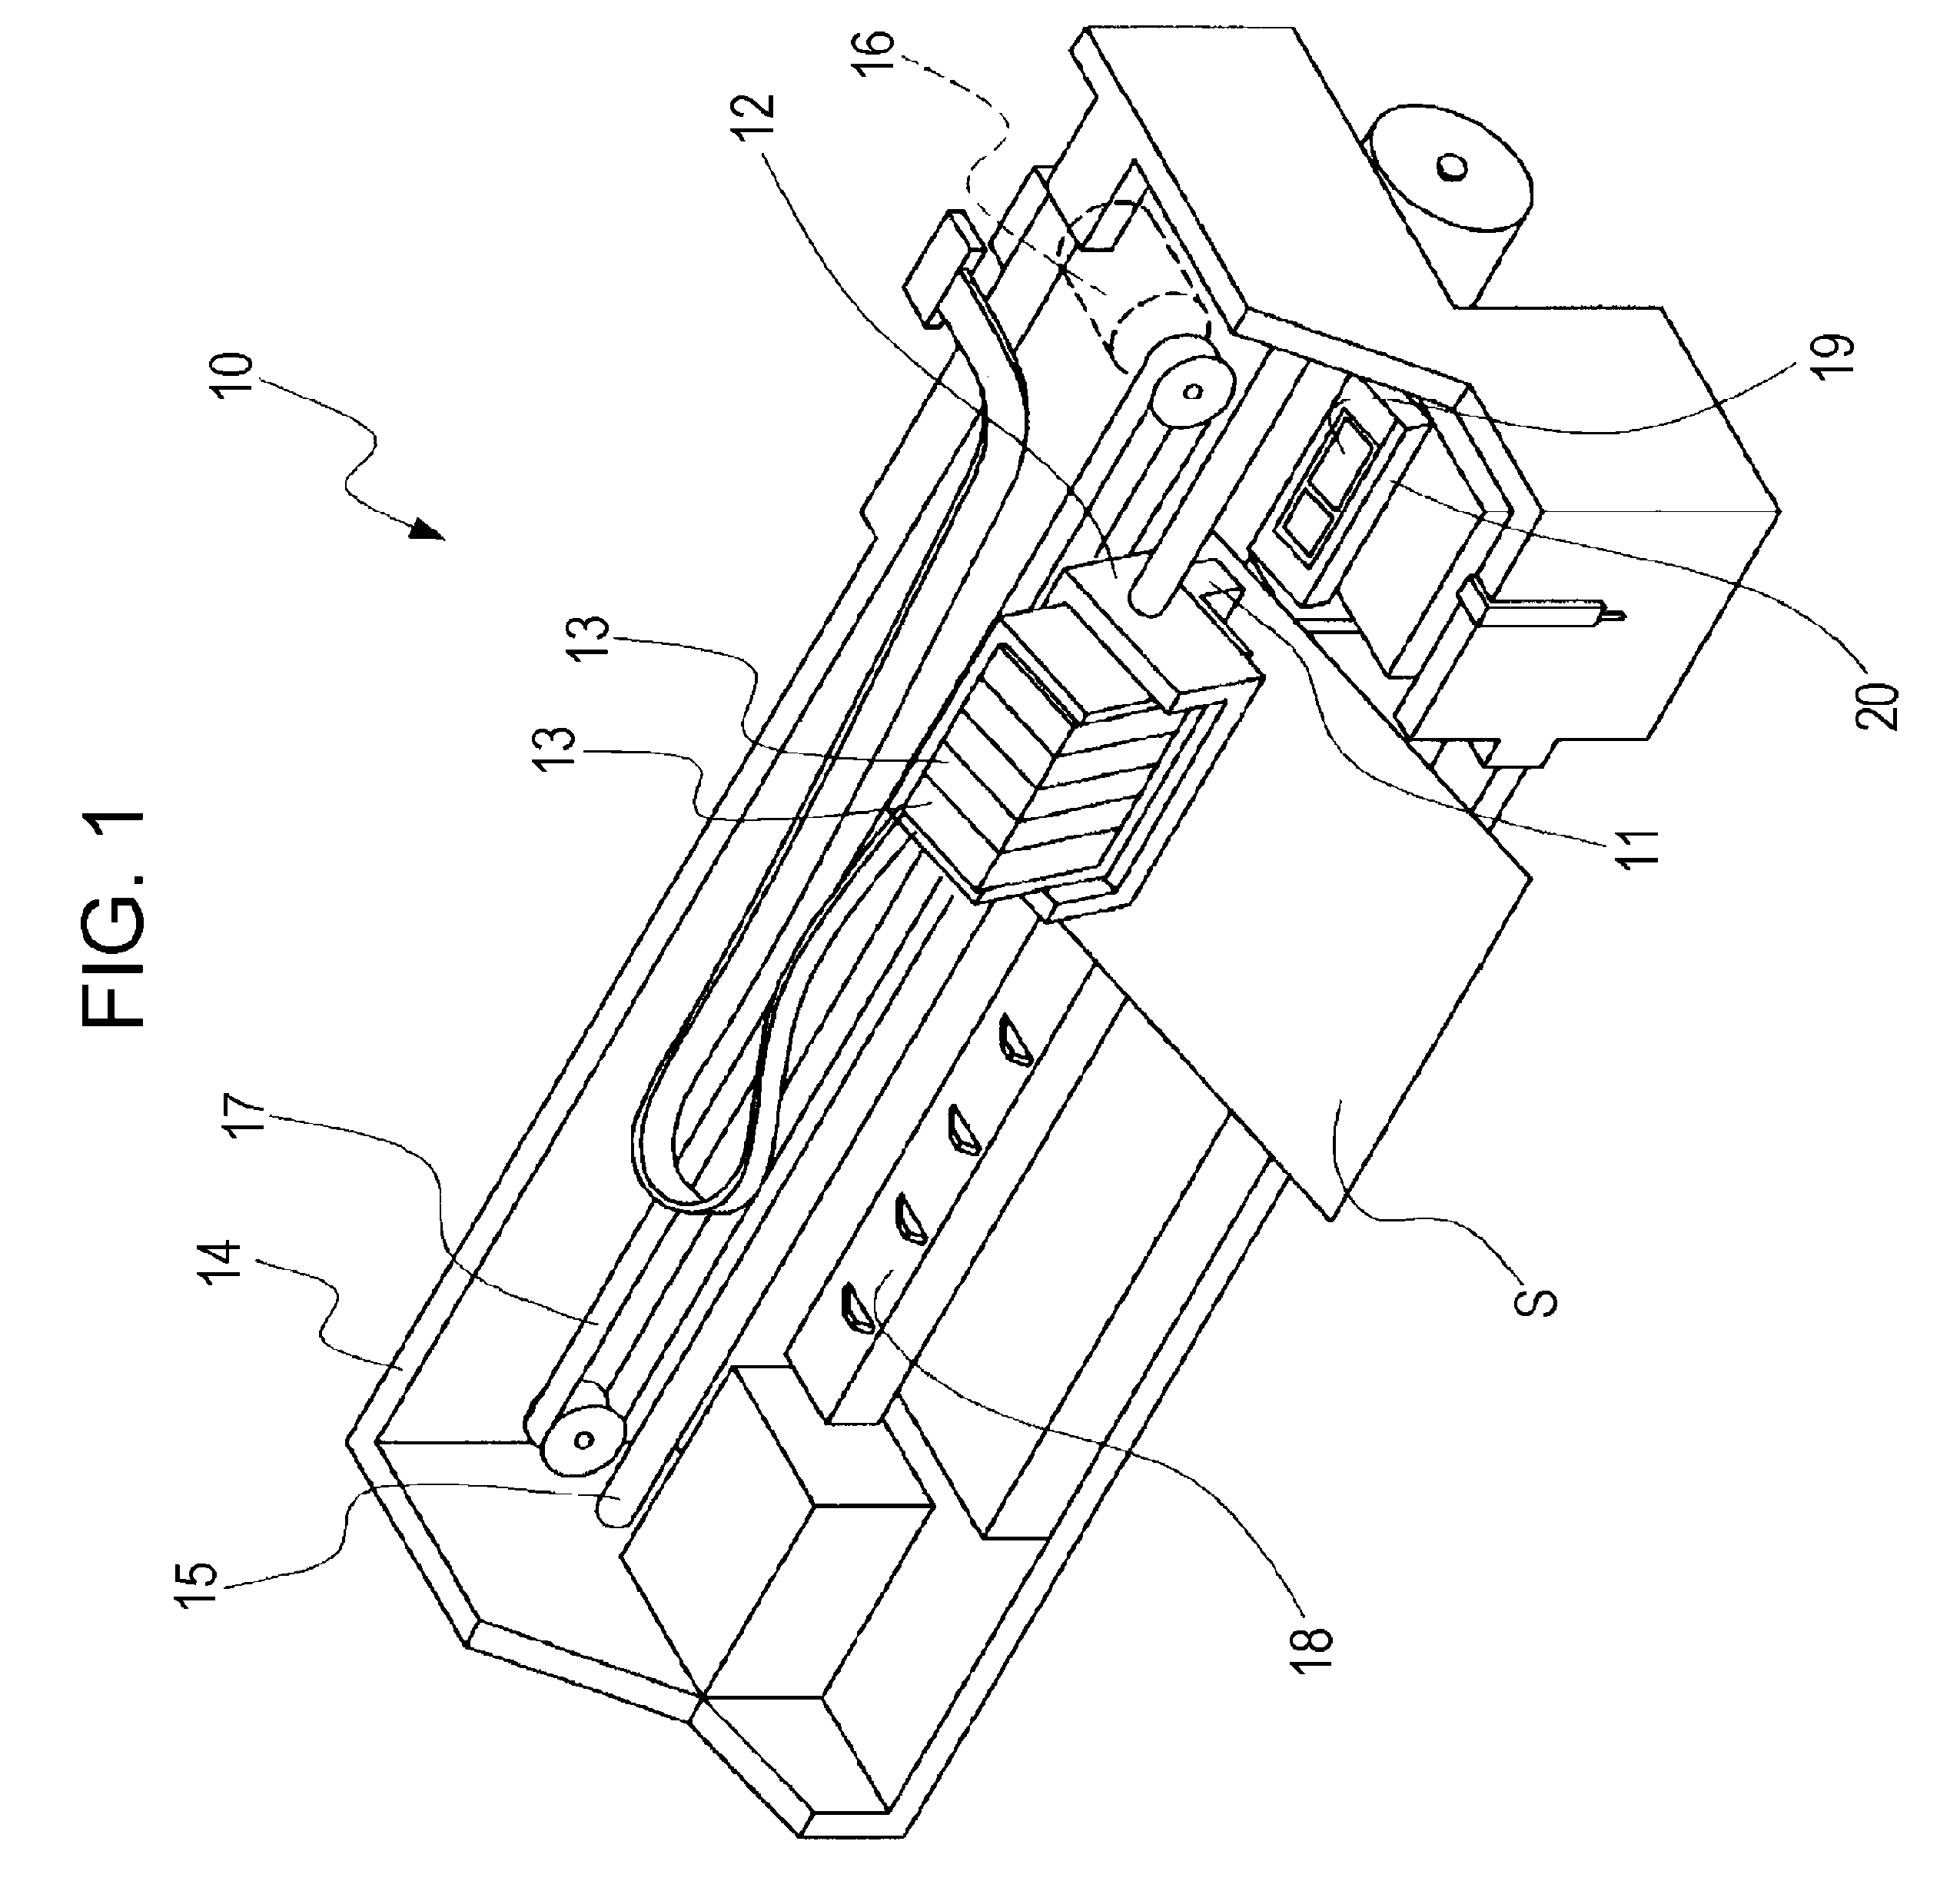 Liquid ejecting head, method of manufacturing the same, and liquid ejecting apparatus